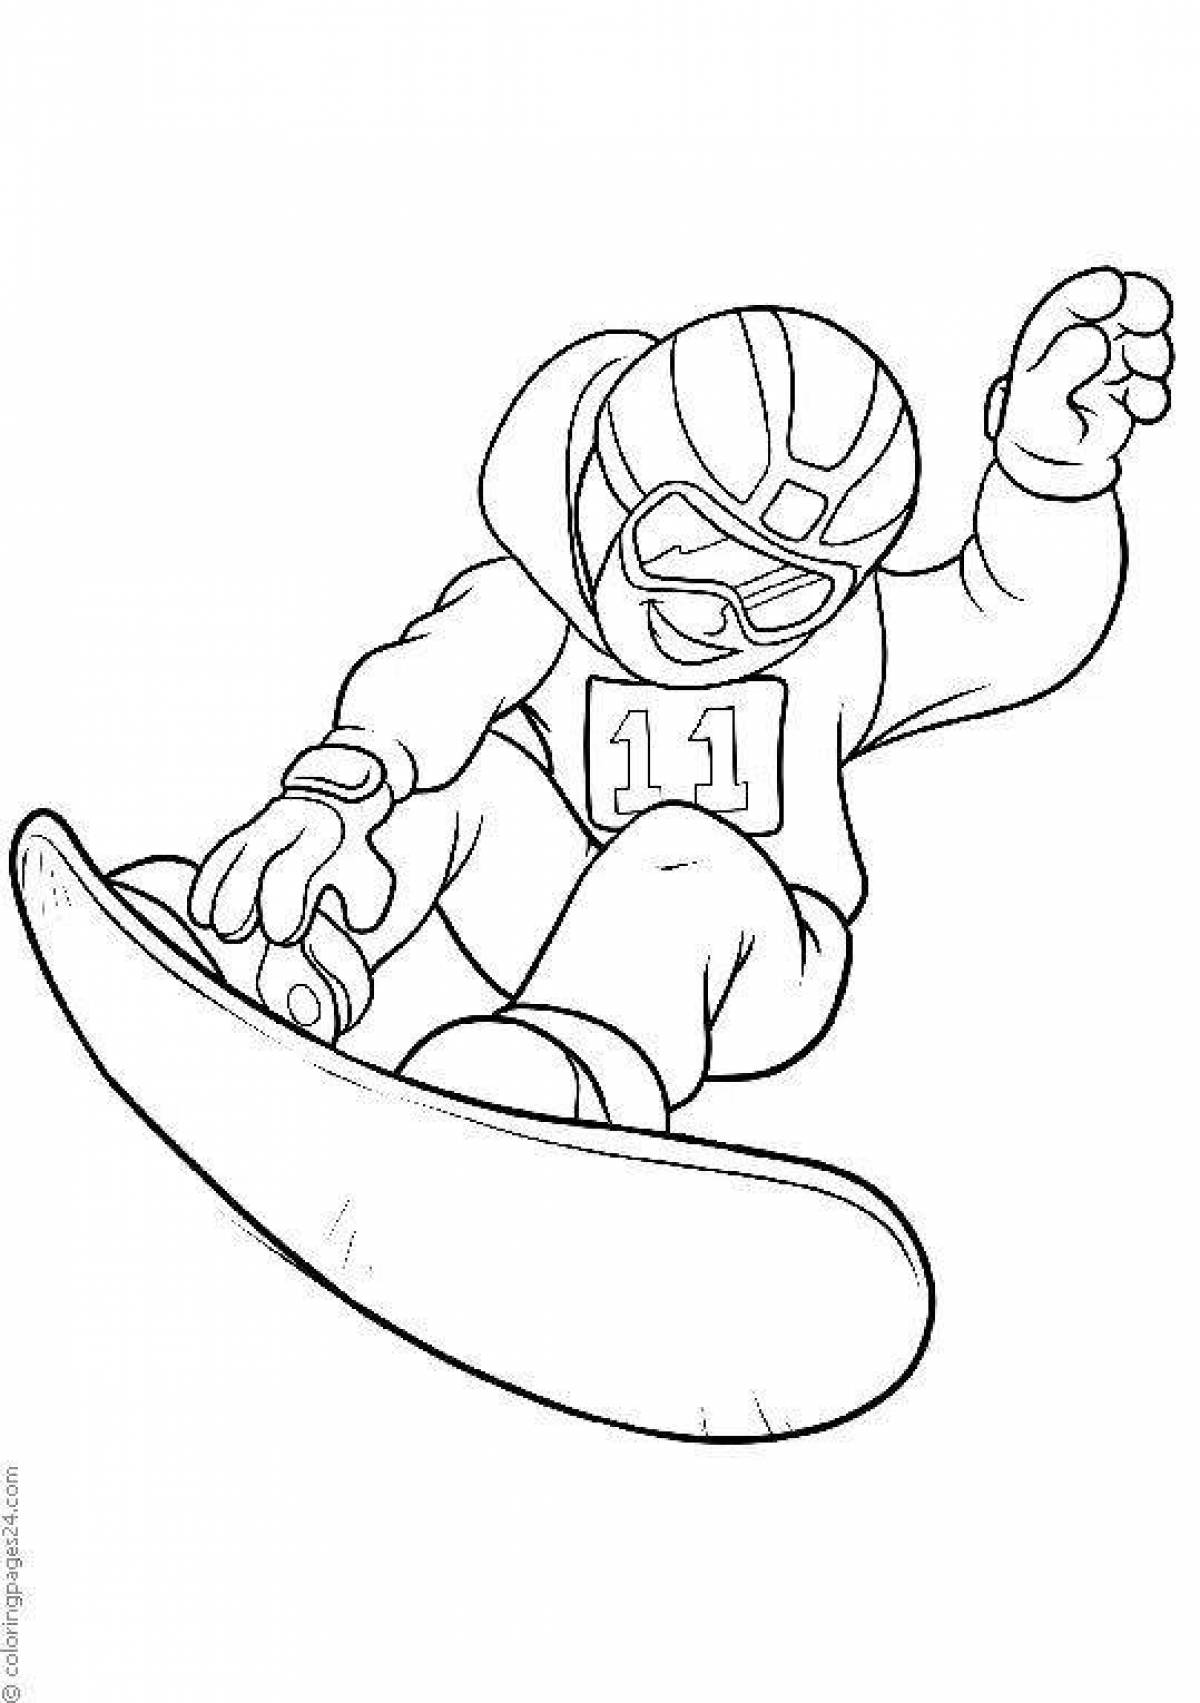 Amazing snowboard coloring page